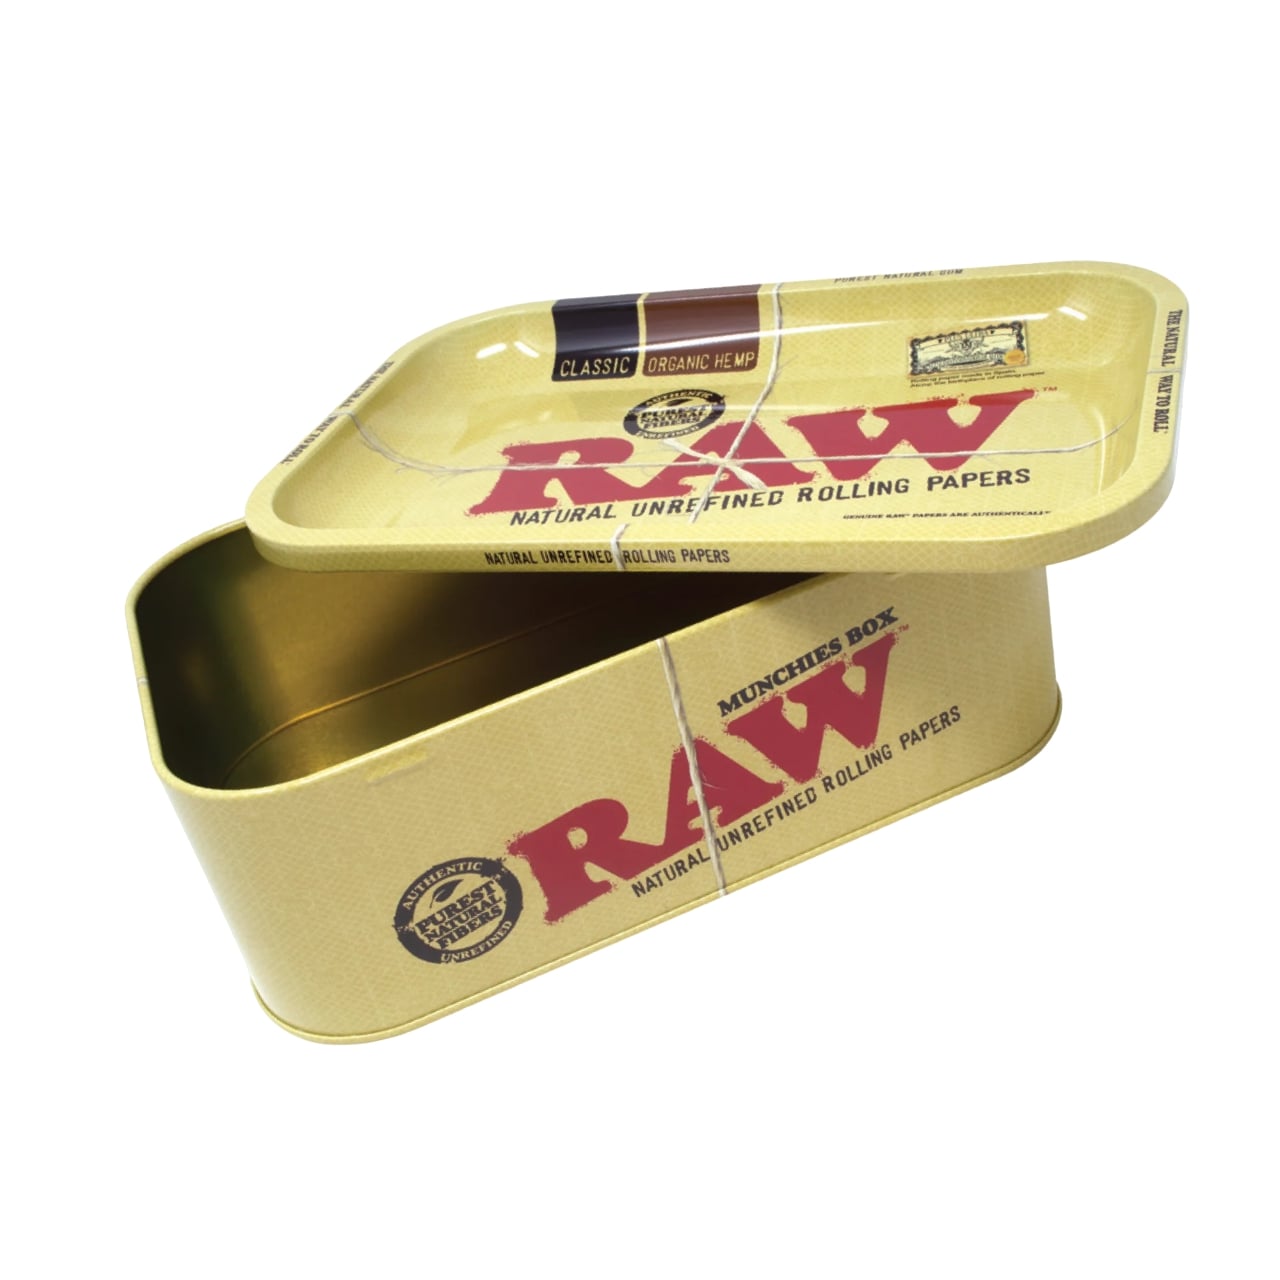 RAW Munchies Box with Rolling Tray Lid Open